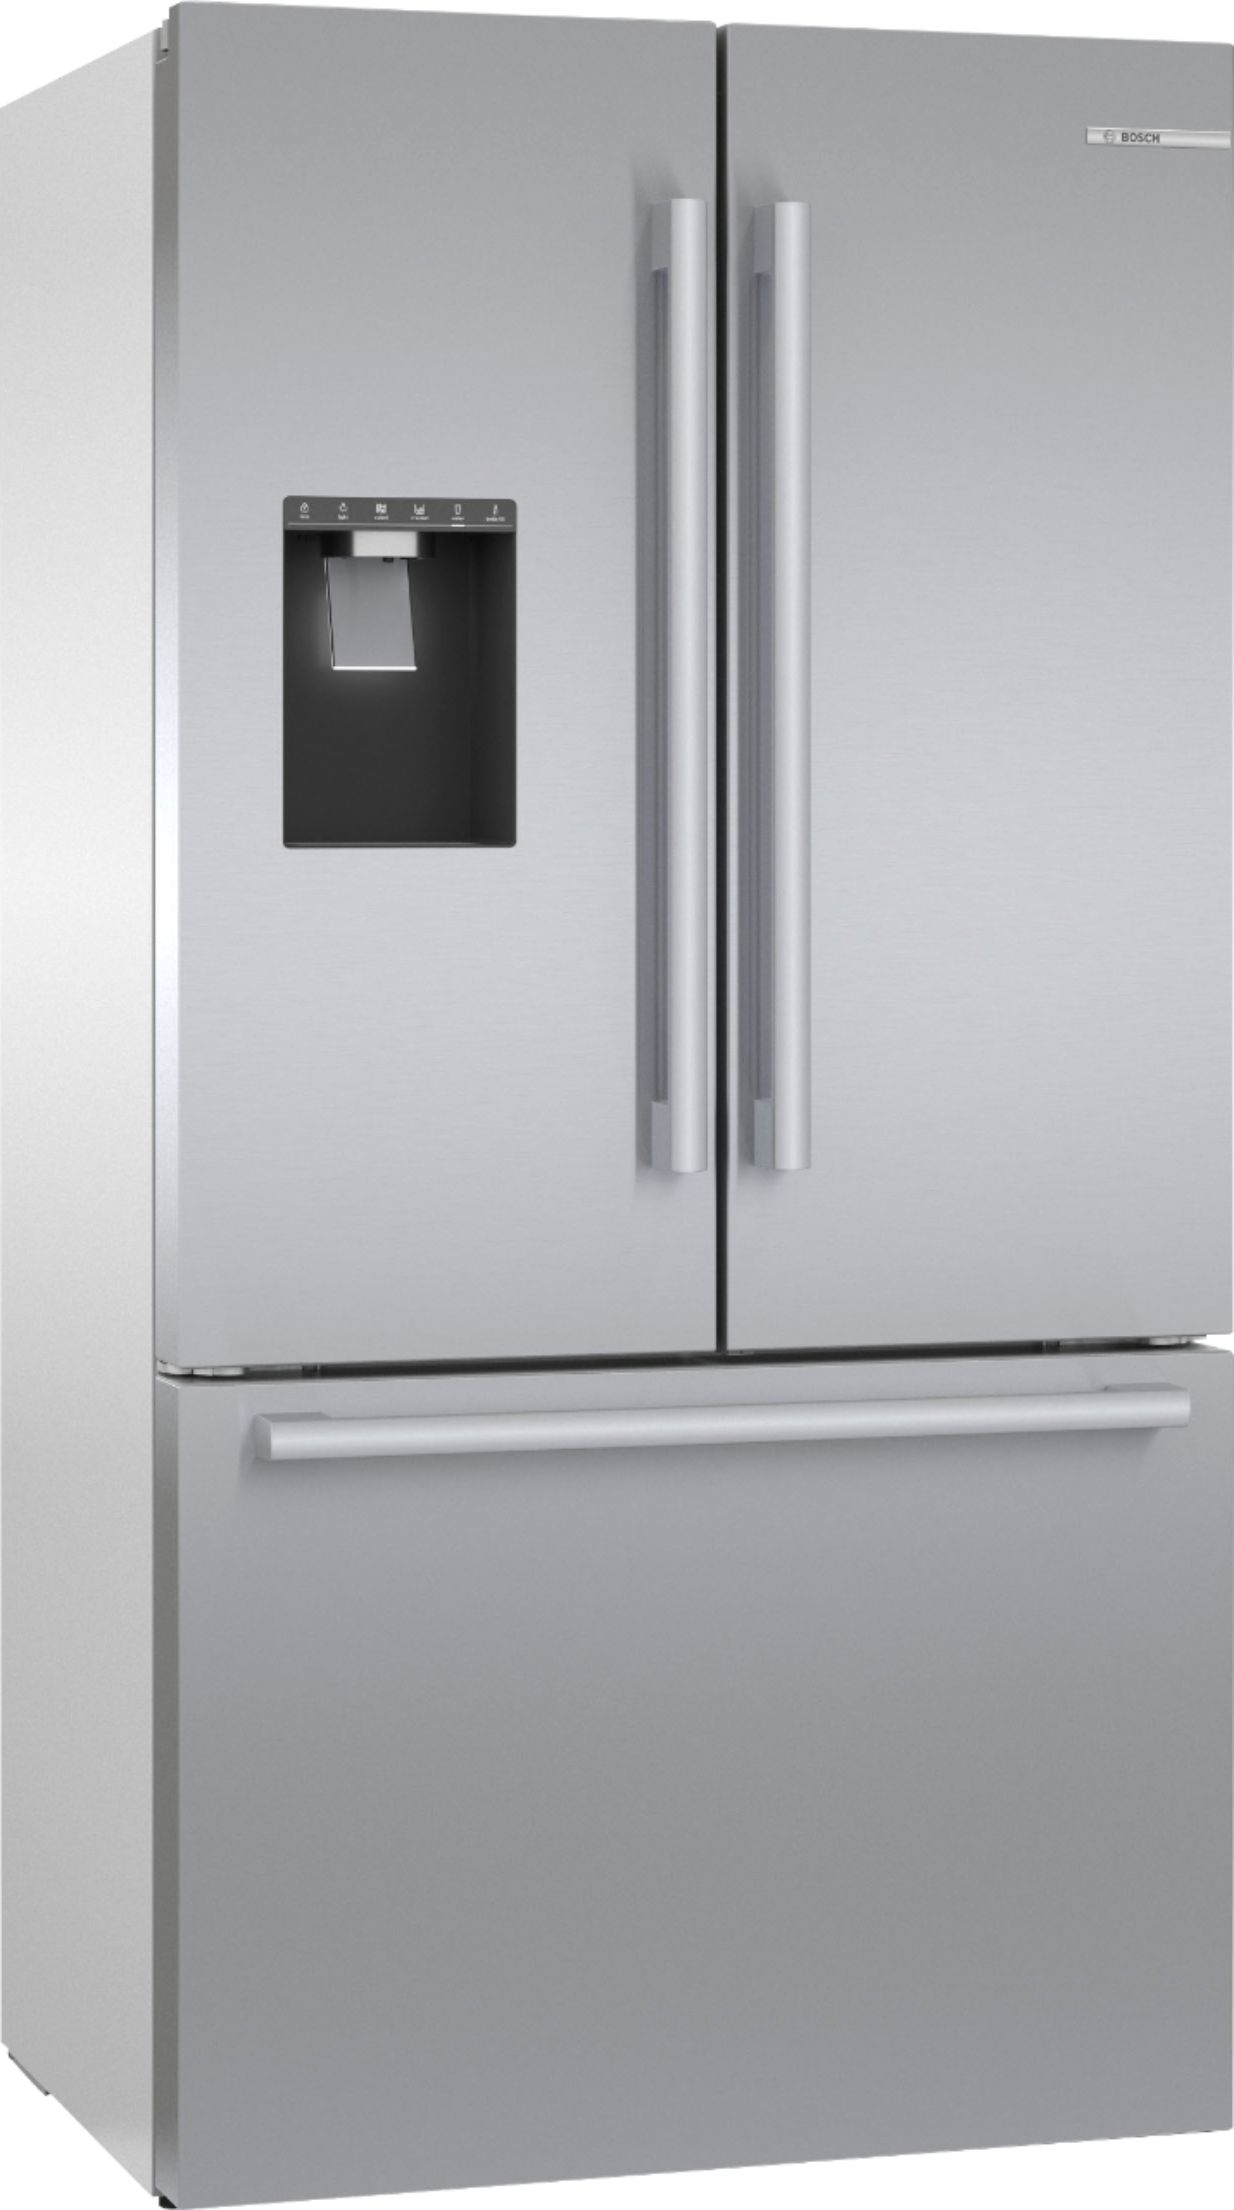 Angle View: Bosch - 500 Series 21 Cu. Ft. French Door Counter-Depth Smart Refrigerator with External Water and Ice Maker - Stainless steel